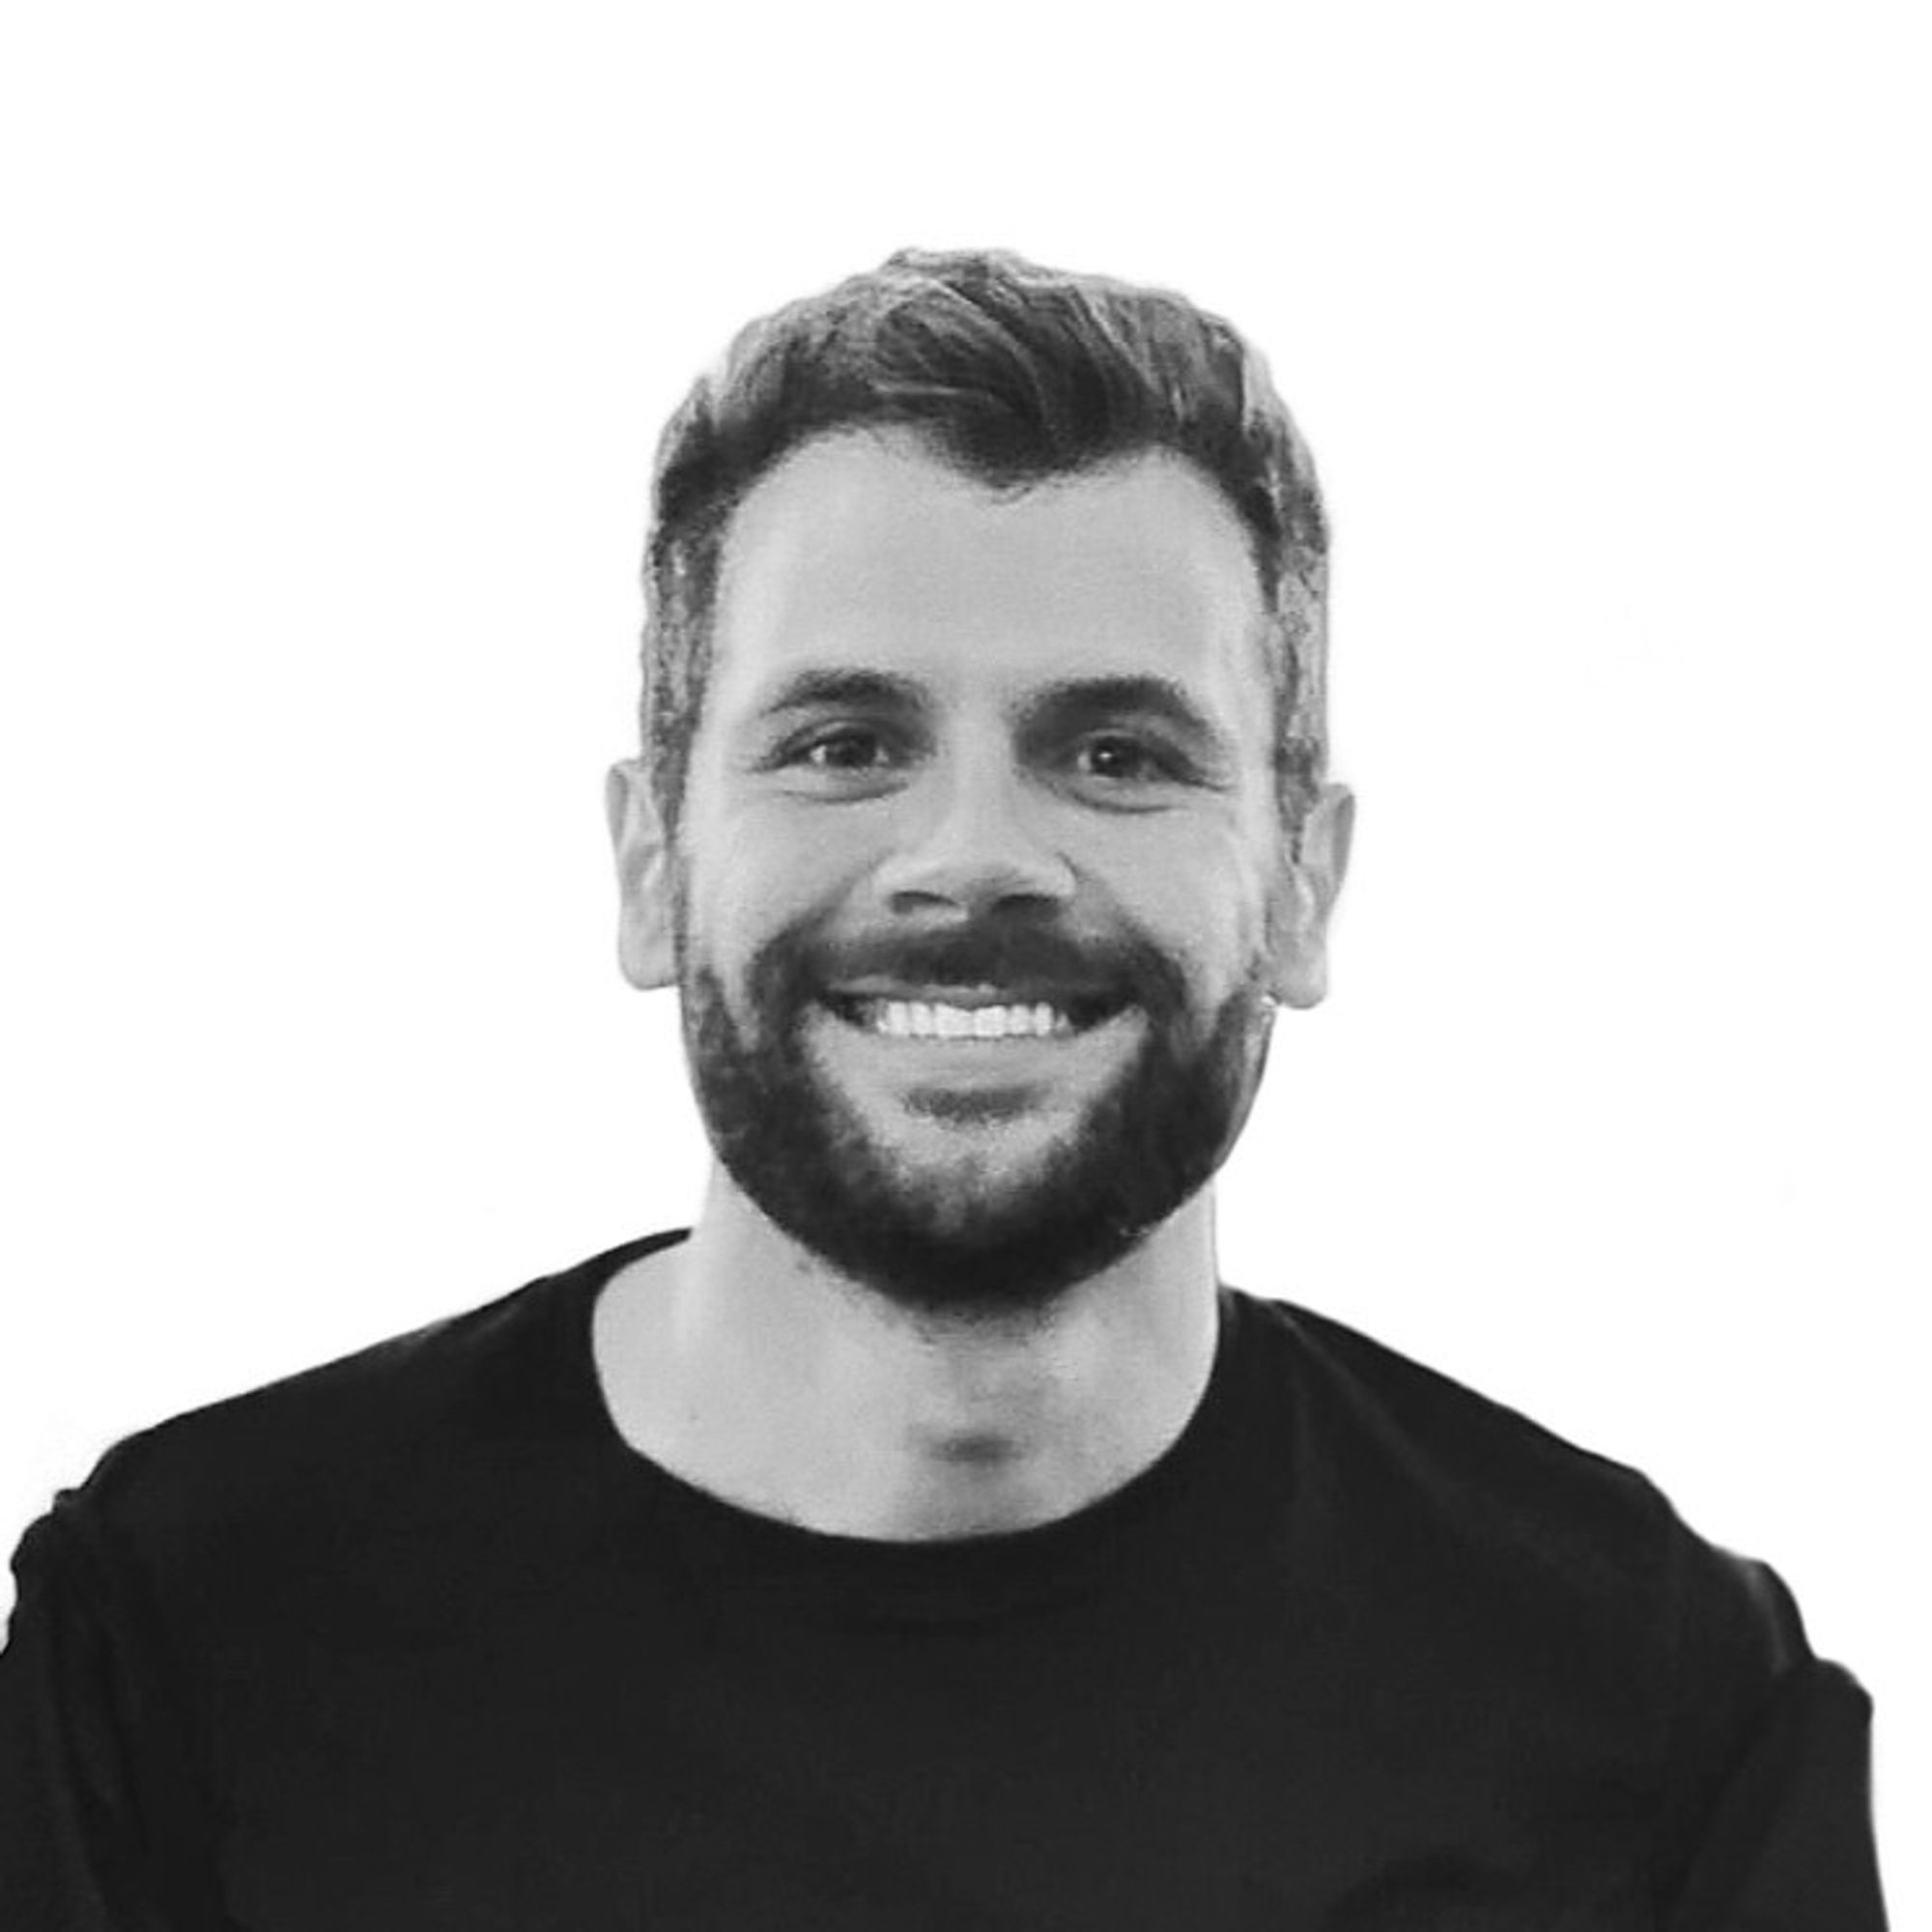 Davide Russo
Principal Product Manager
Former Stripe, BCG, Facebook • Mindfulness, home-cooked meals and travel